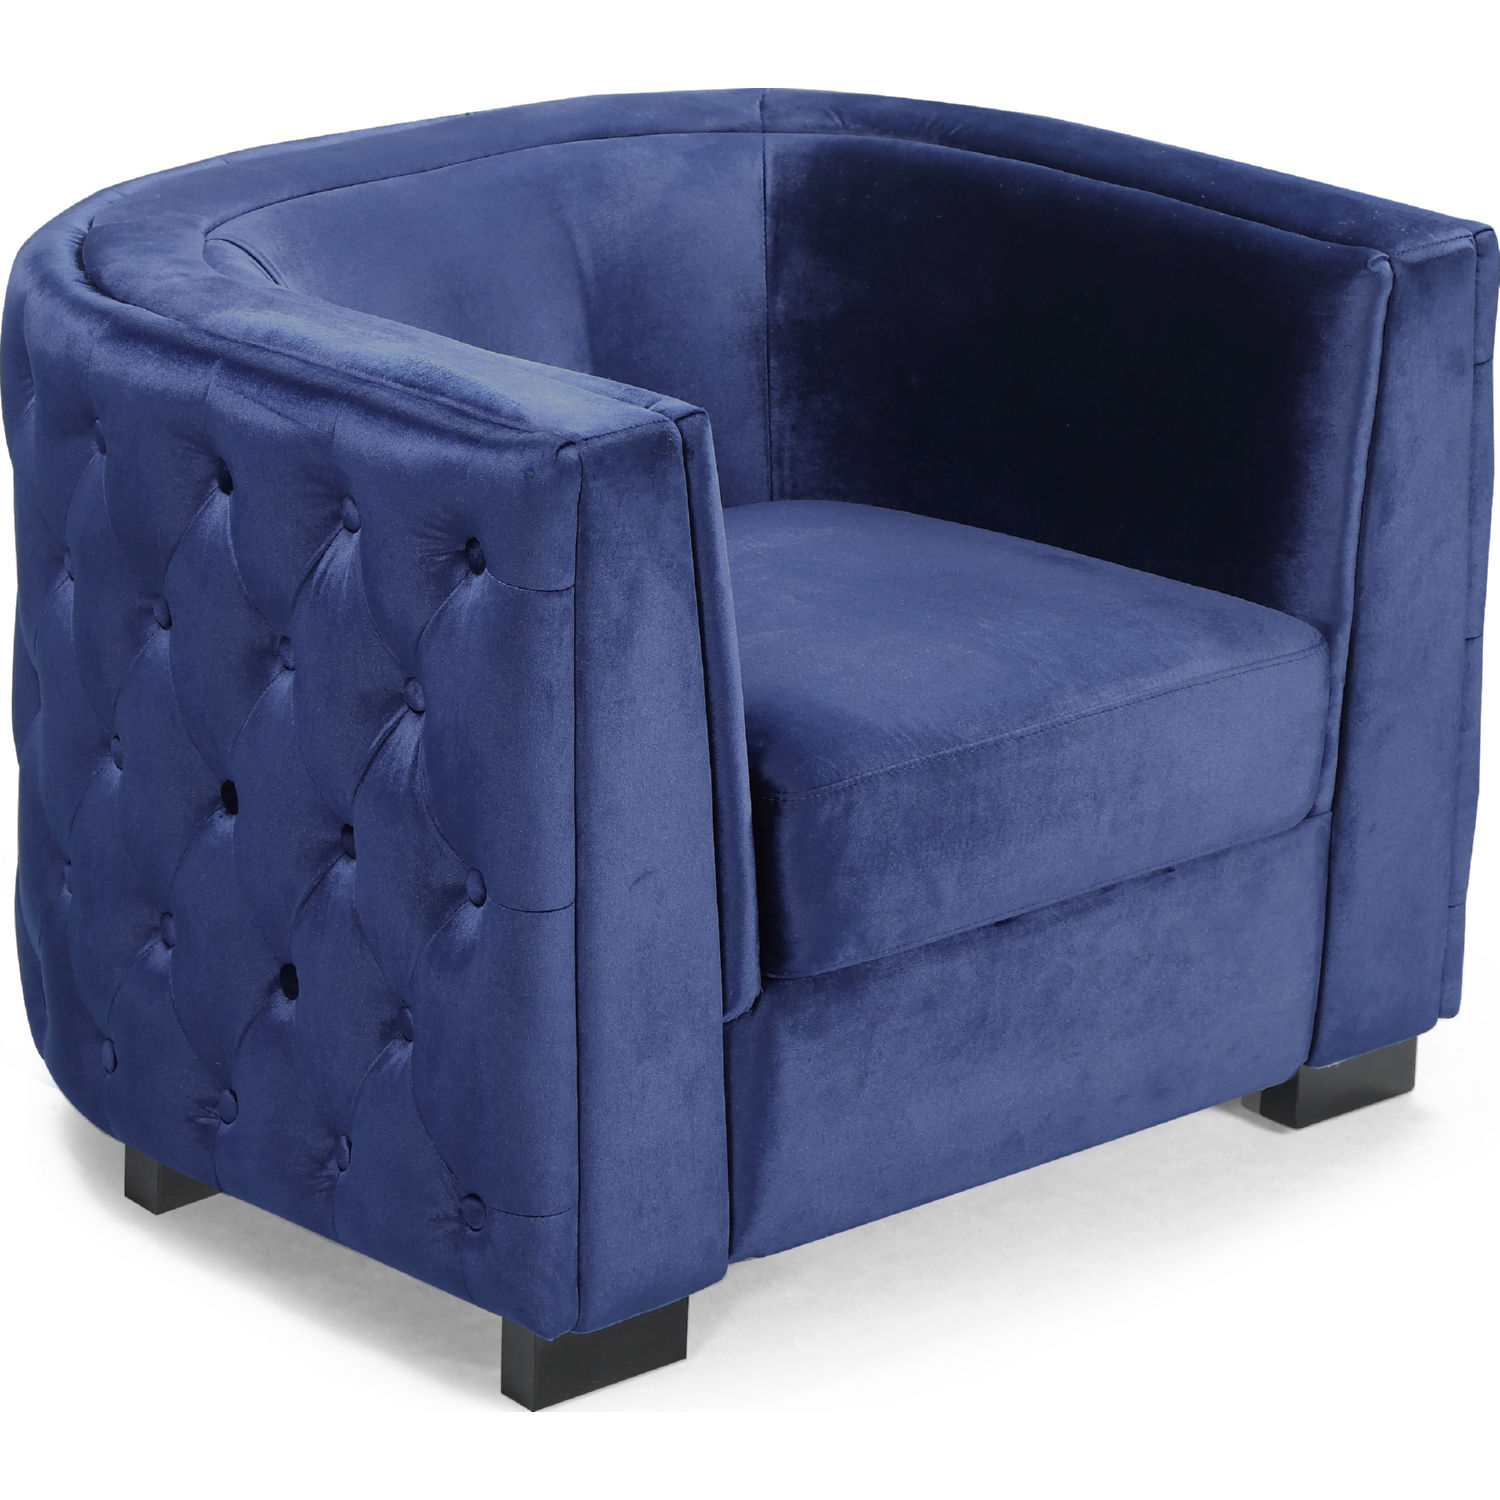 Chic Iconic Fcc9266 Dr Saratov Club Chair In Button Tufted Navy